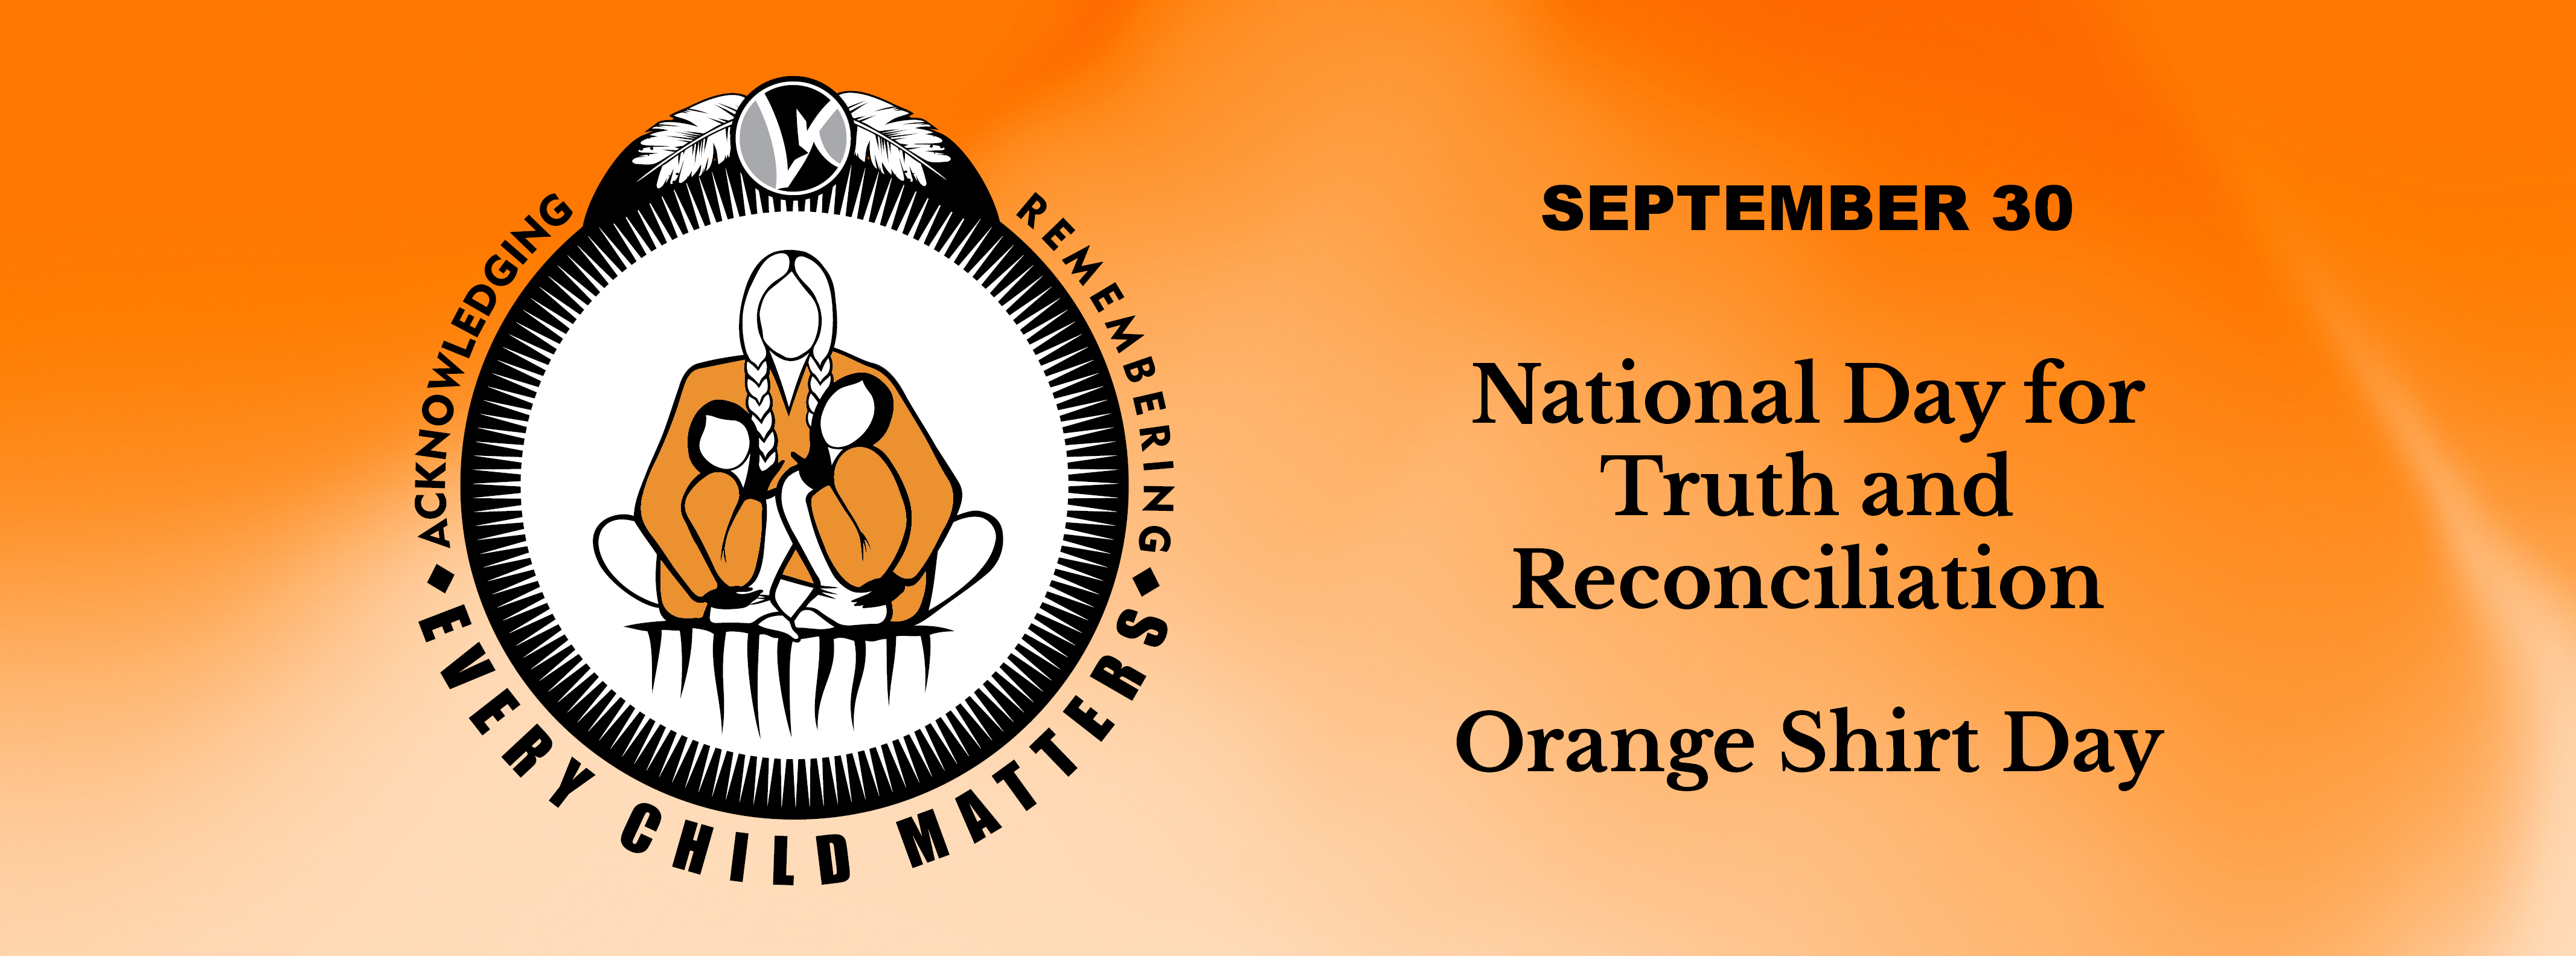 LKDSB recognizes National Day for Truth and Reconciliation and Orange Shirt Day on Sept. 30